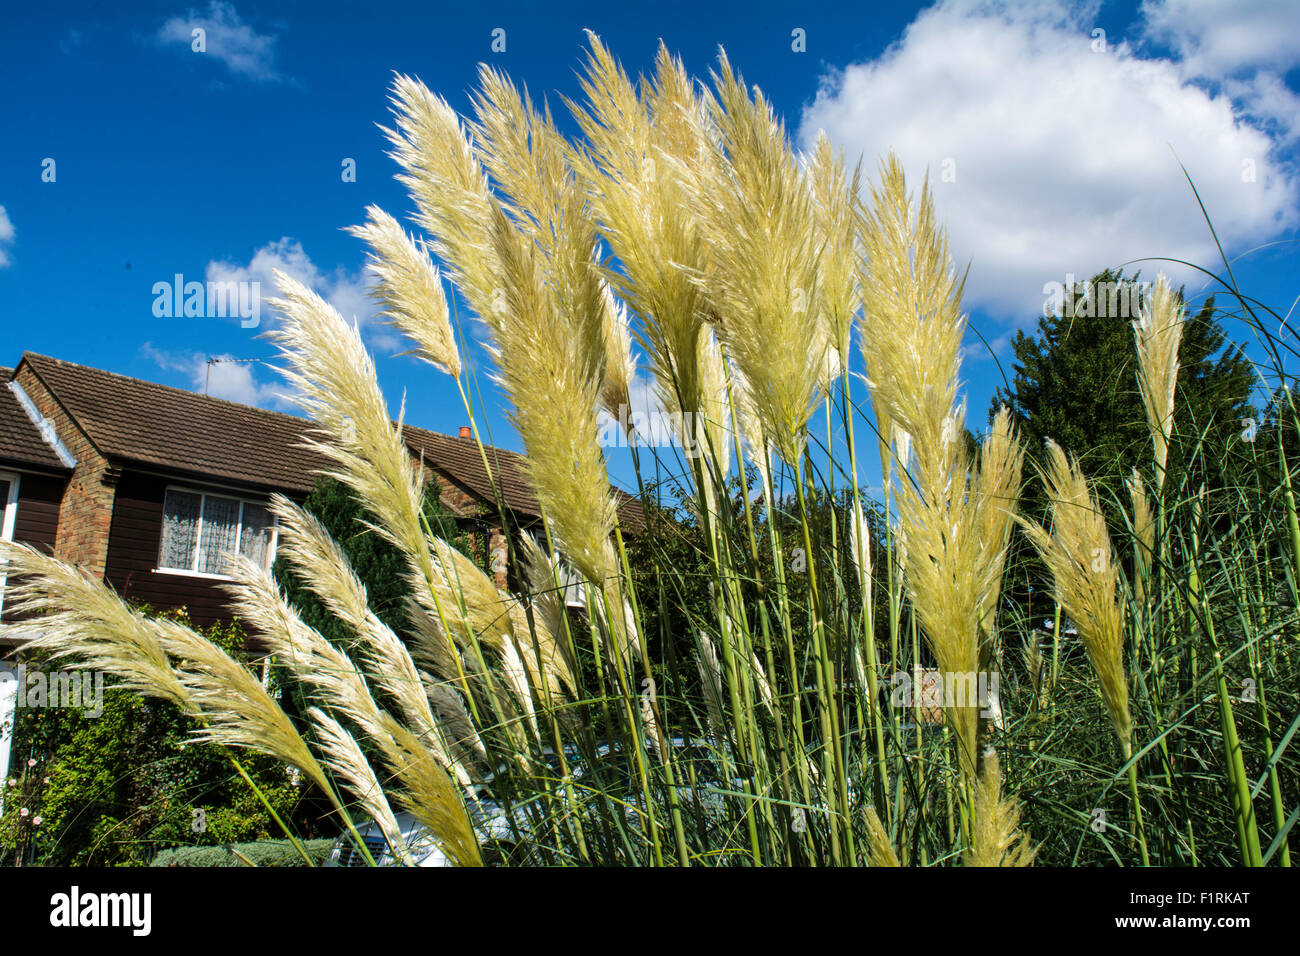 Net curtains and pampas grass signs of swinging suburbia Stock Photo - Alamy